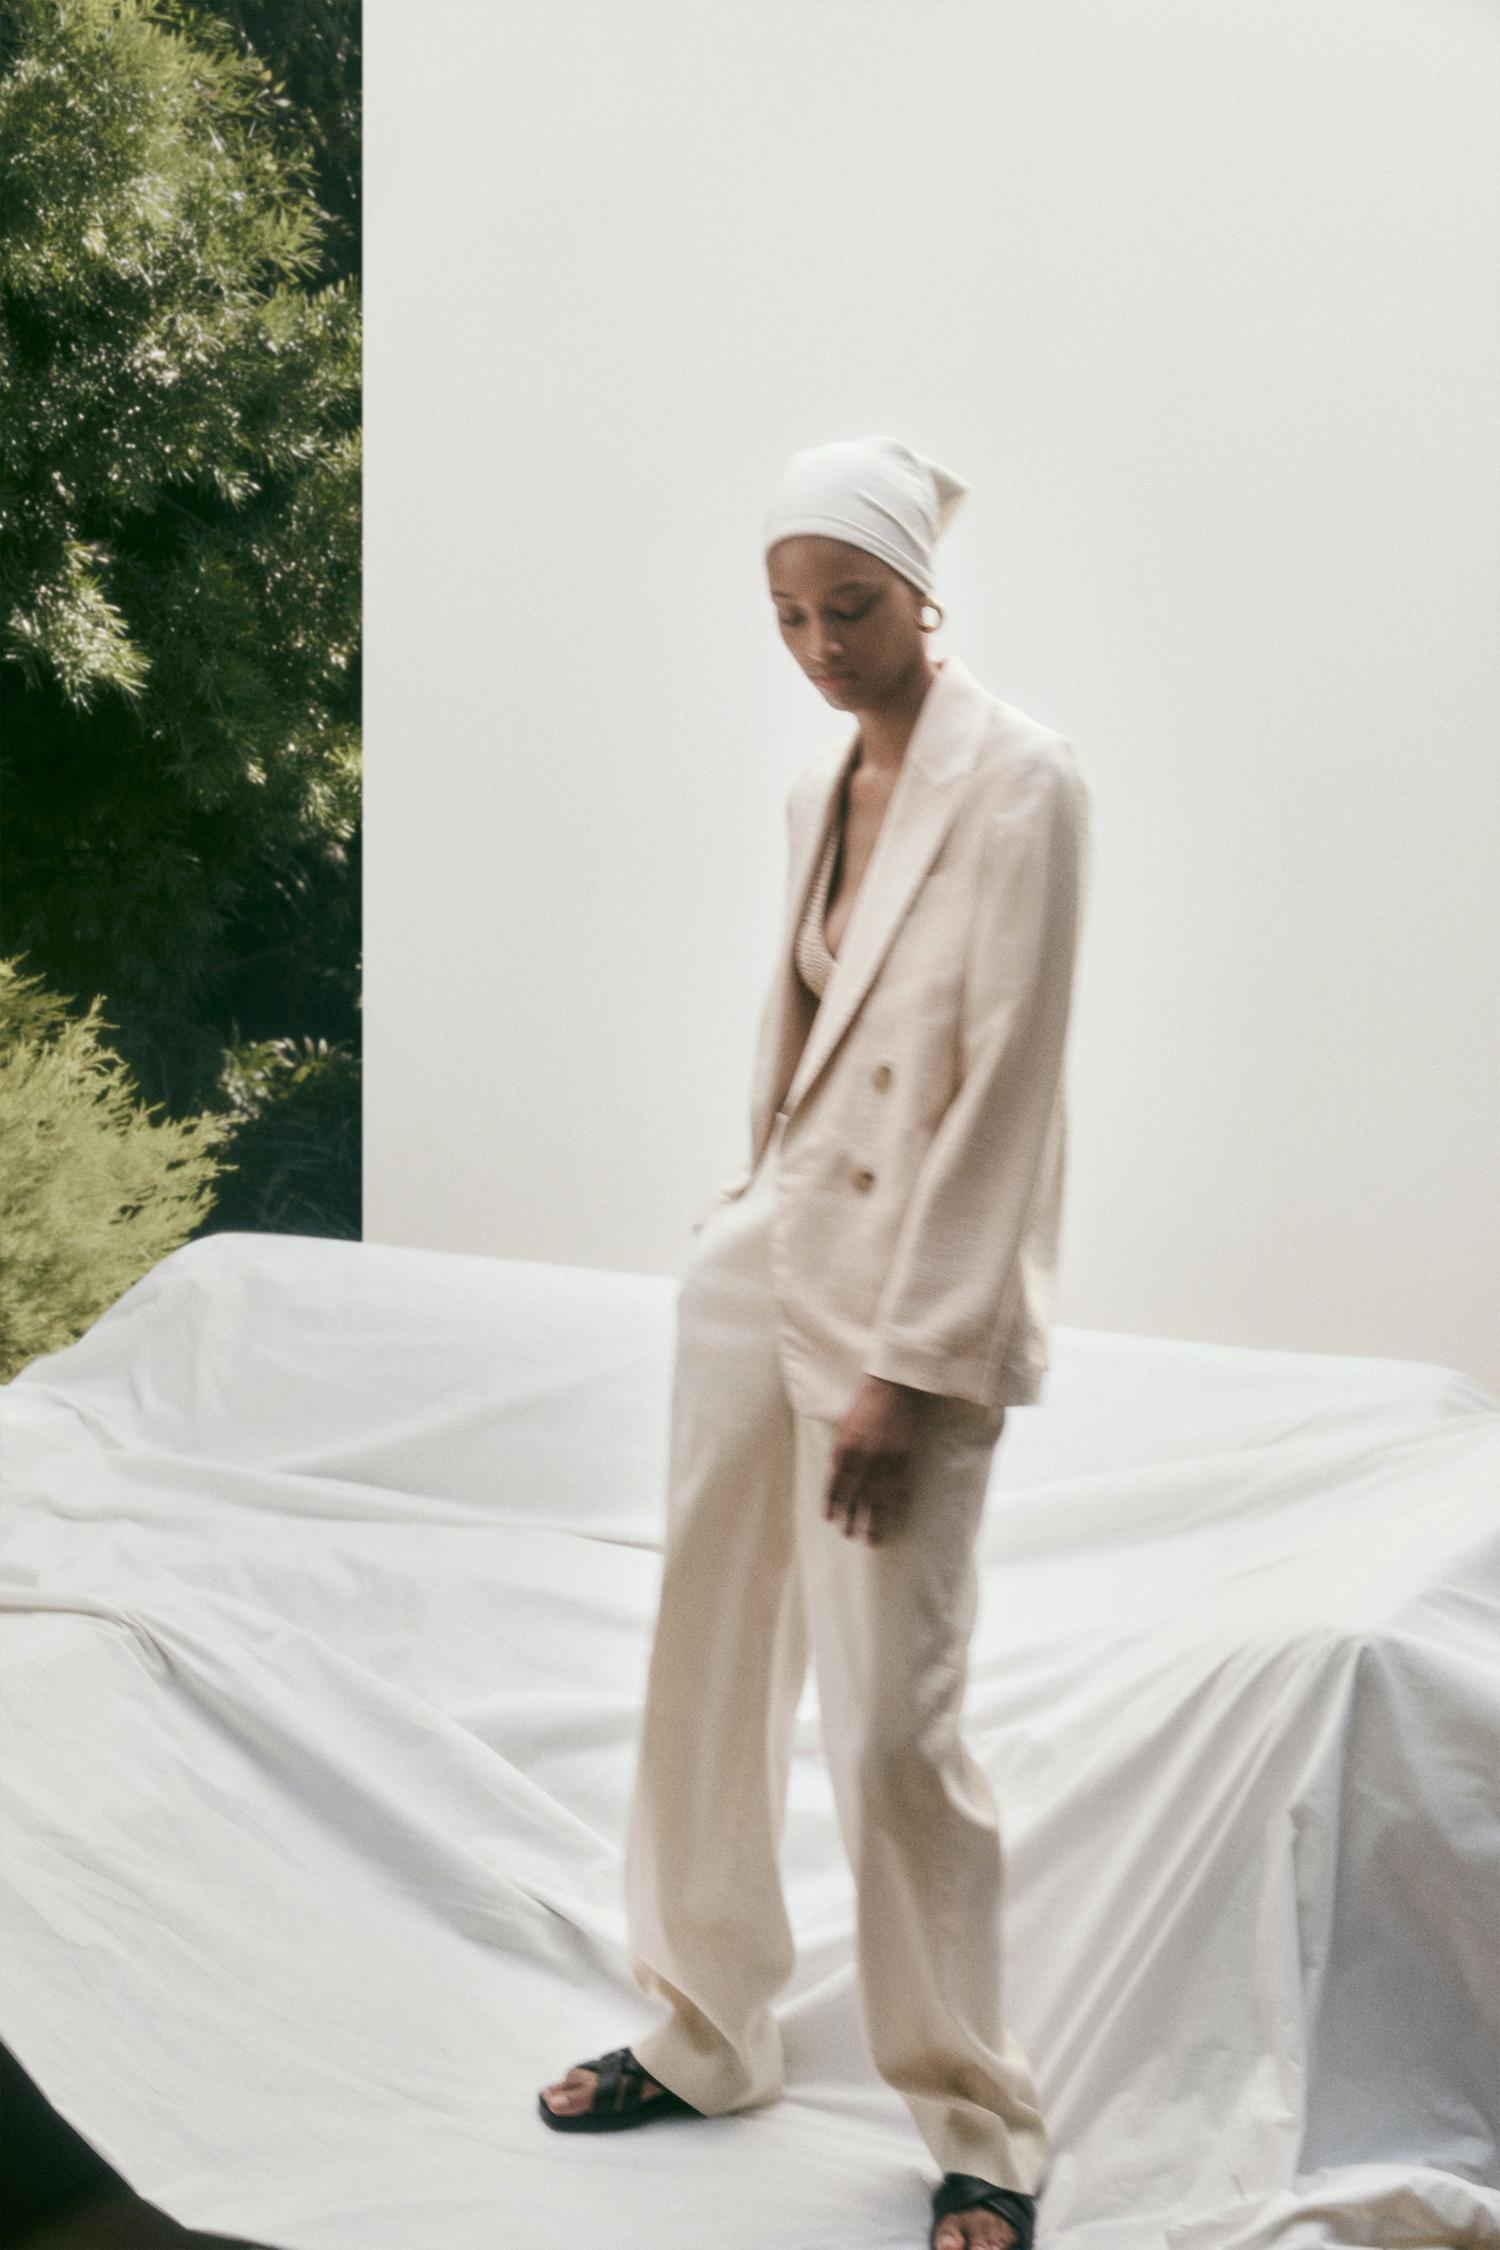 VINCE Sand Wool-blend blazer / VINCE Off-white Belted twill tapered pants. Photographer: Olivia Malone. Stylist: Sissy Chacon. Creative Director: Caroline Belhumeur